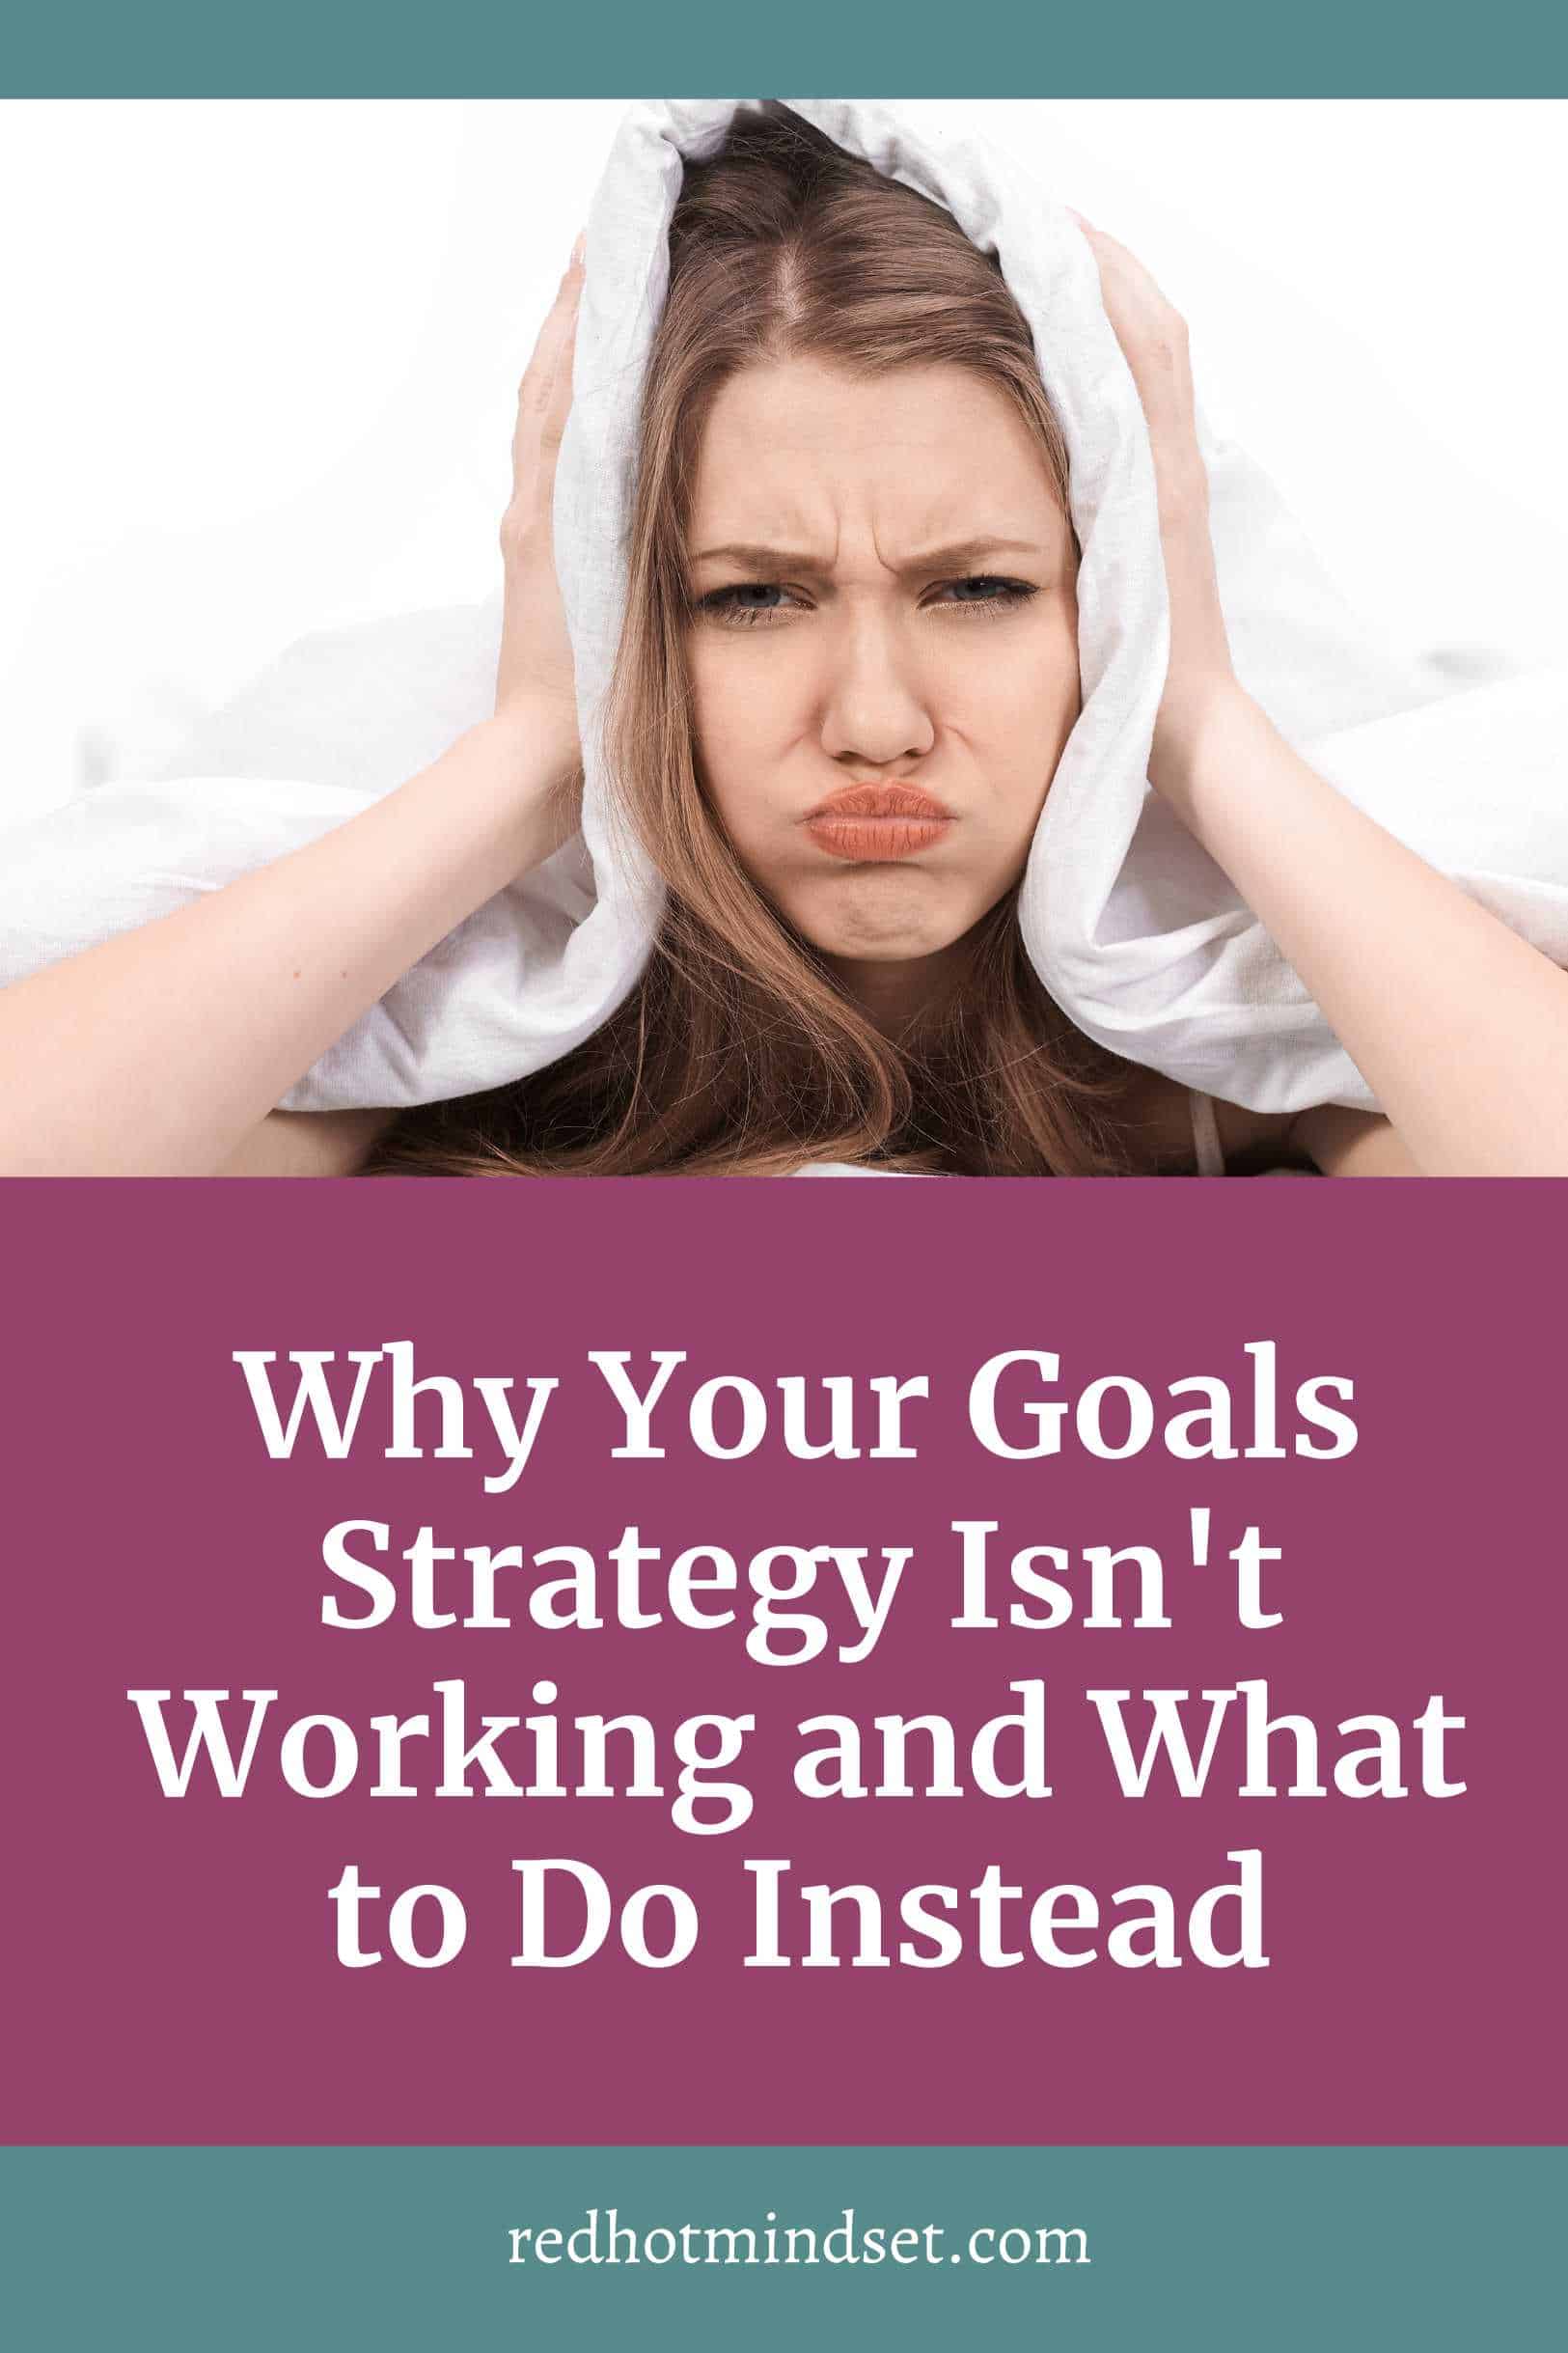 Ep 208 | Why Your Goals Strategy Isn’t Working and What to Do Instead